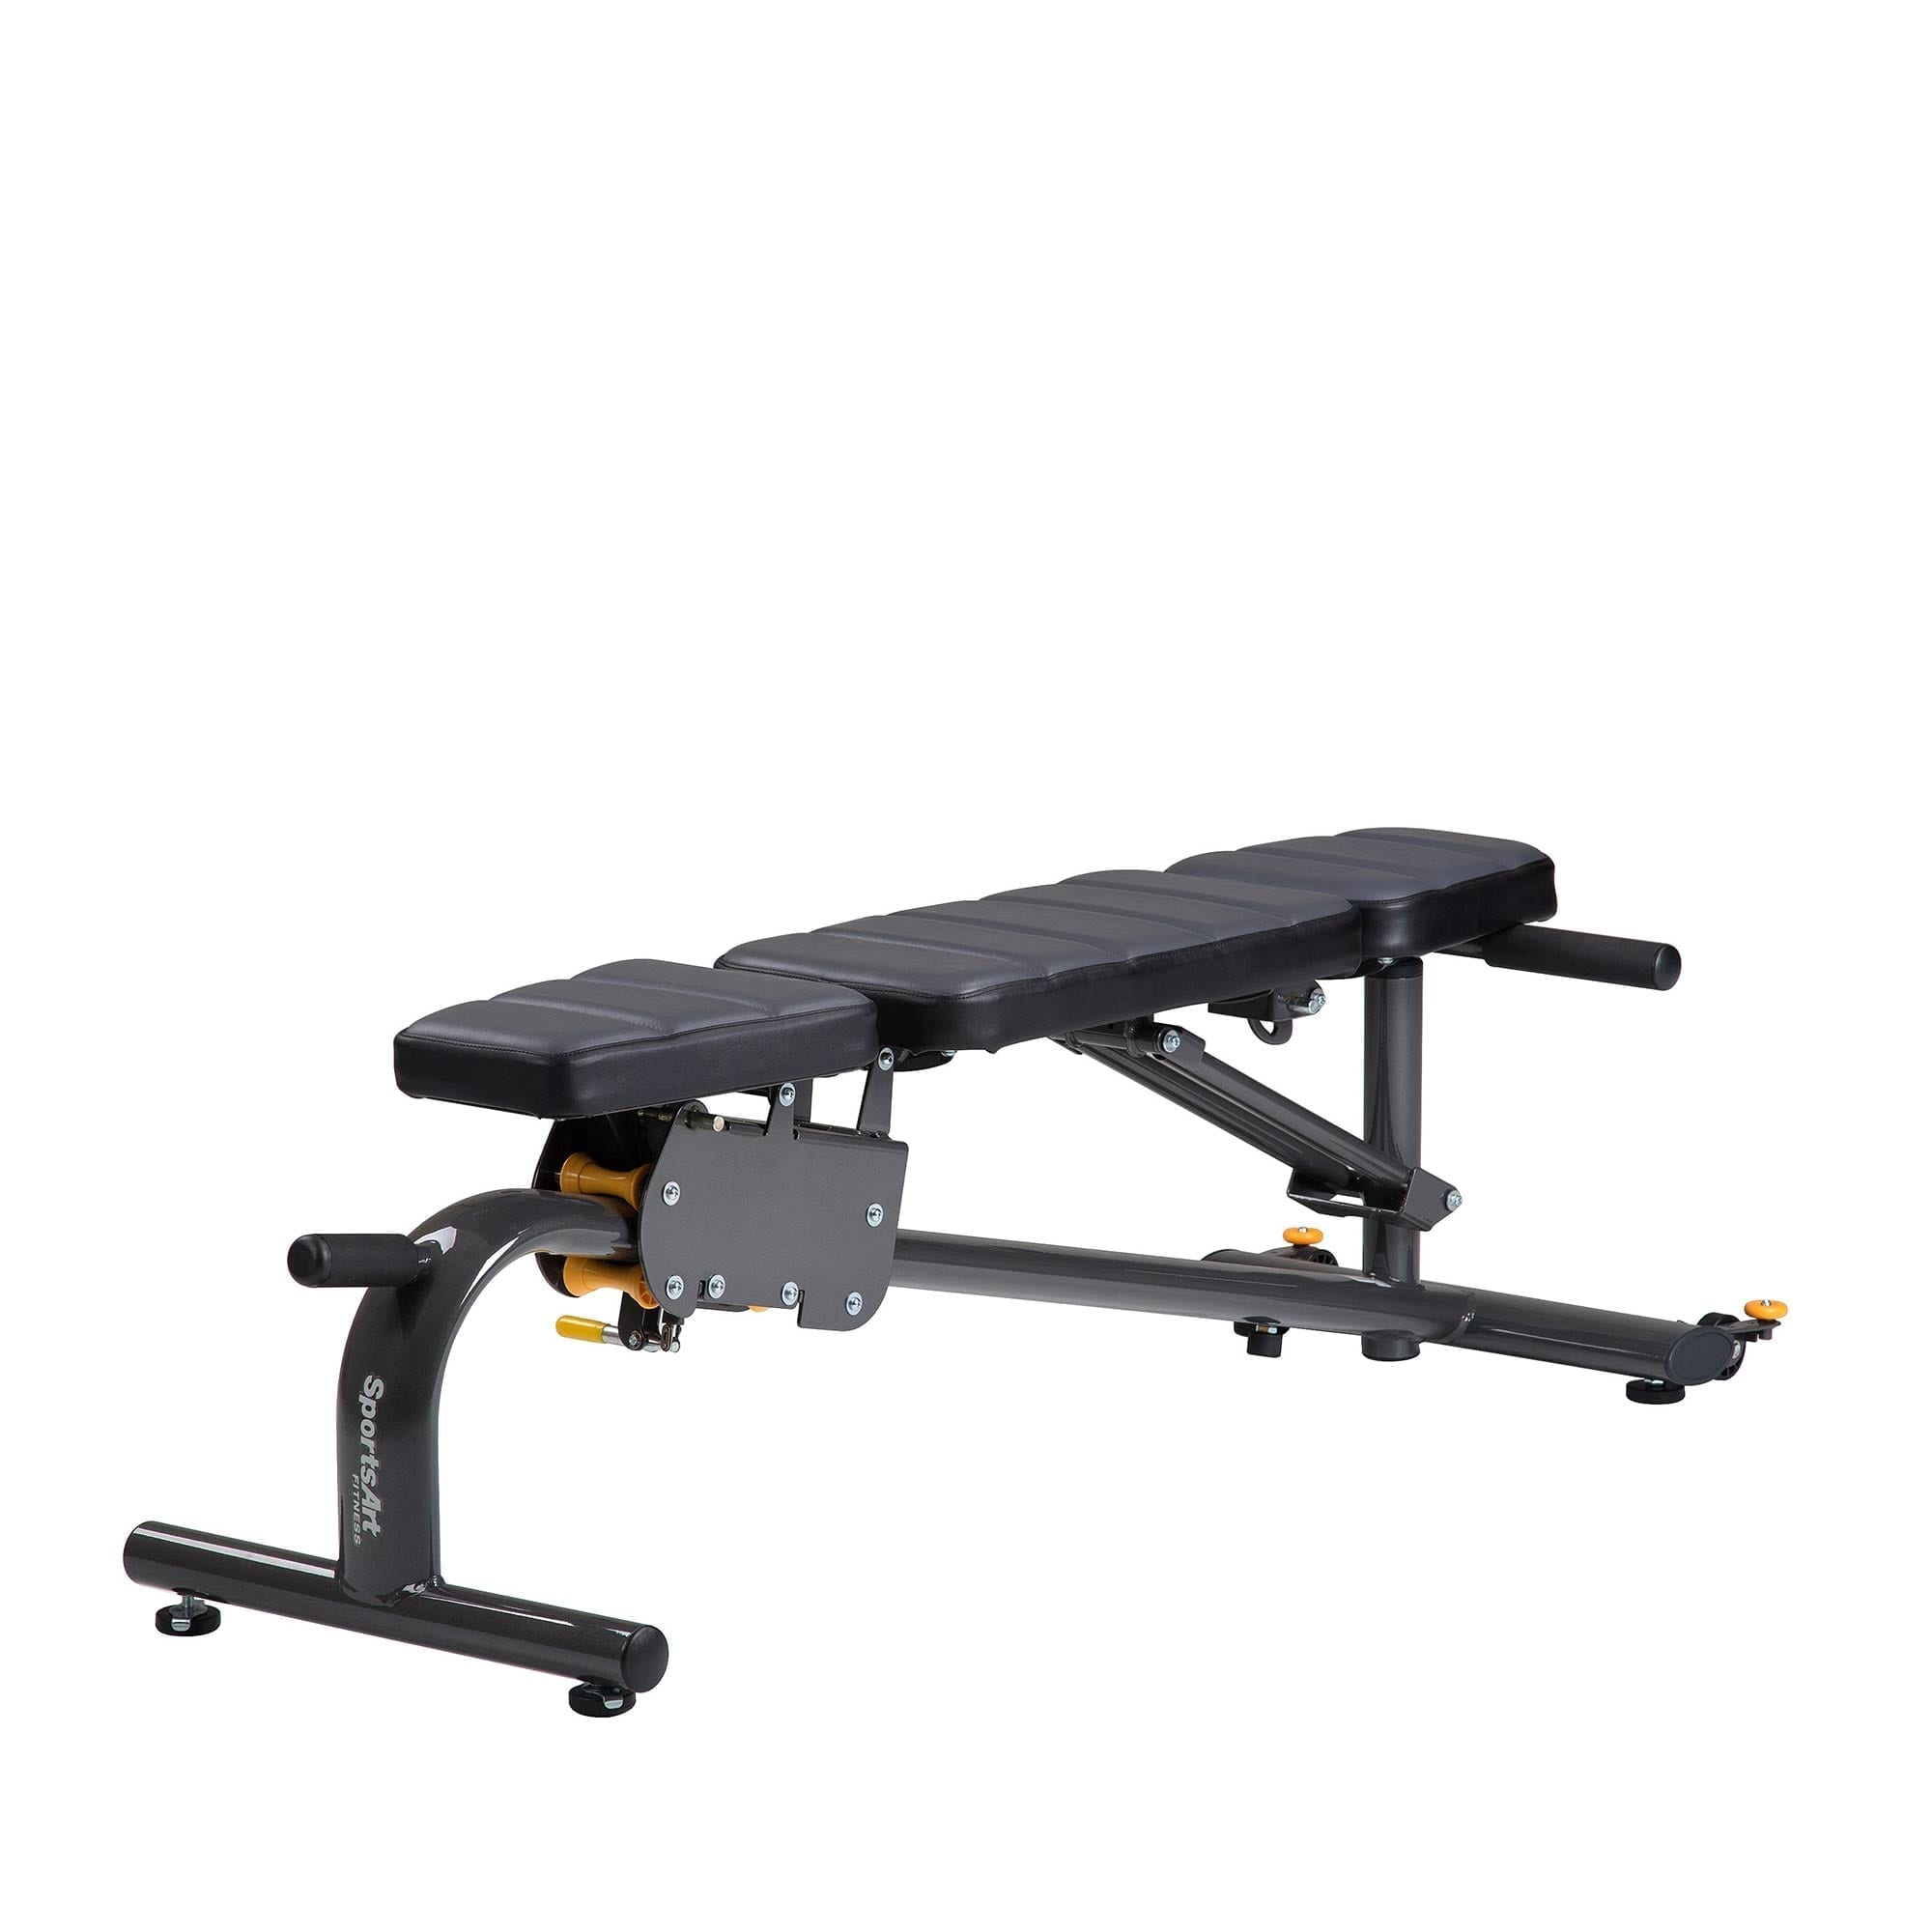 PERFORMANCE SERIES SINGLE STACK FUNCTIONAL TRAINER GYM WITH MULTI-ANGLE BENCH – SPORTSART (A93) 3